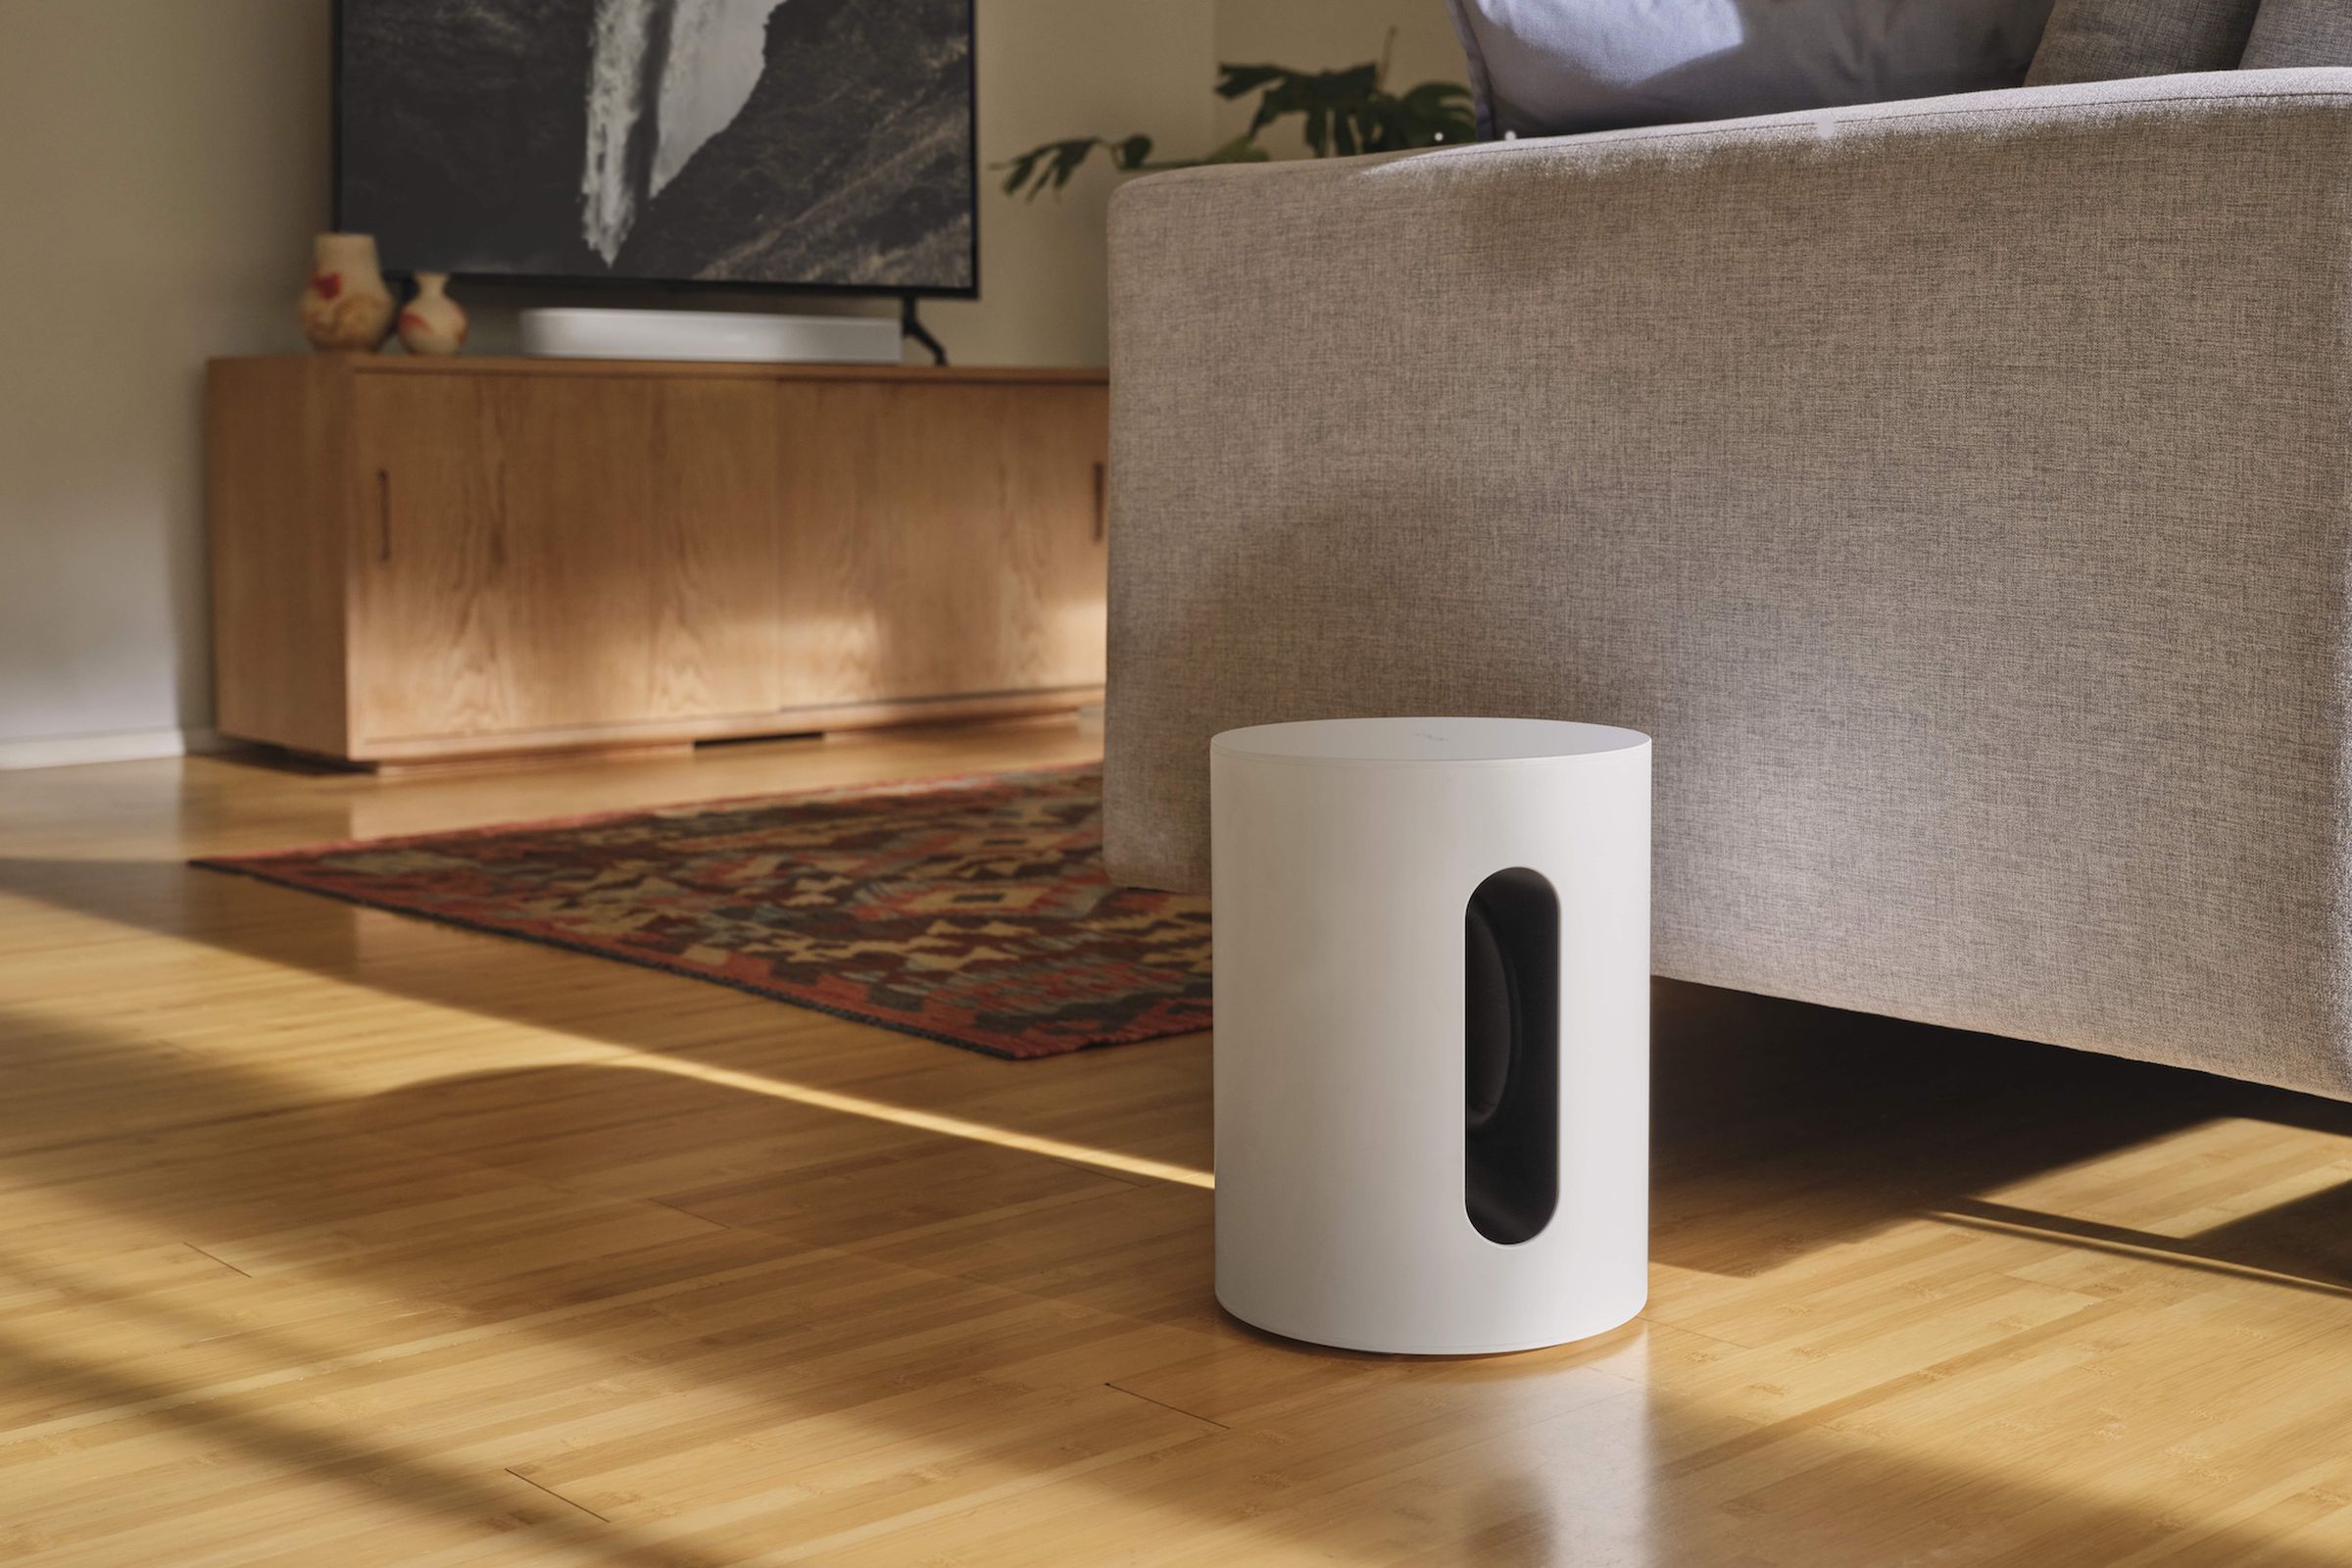 A Sonos Sub Mini subwoofer pictured next to a couch, with a television in the background.